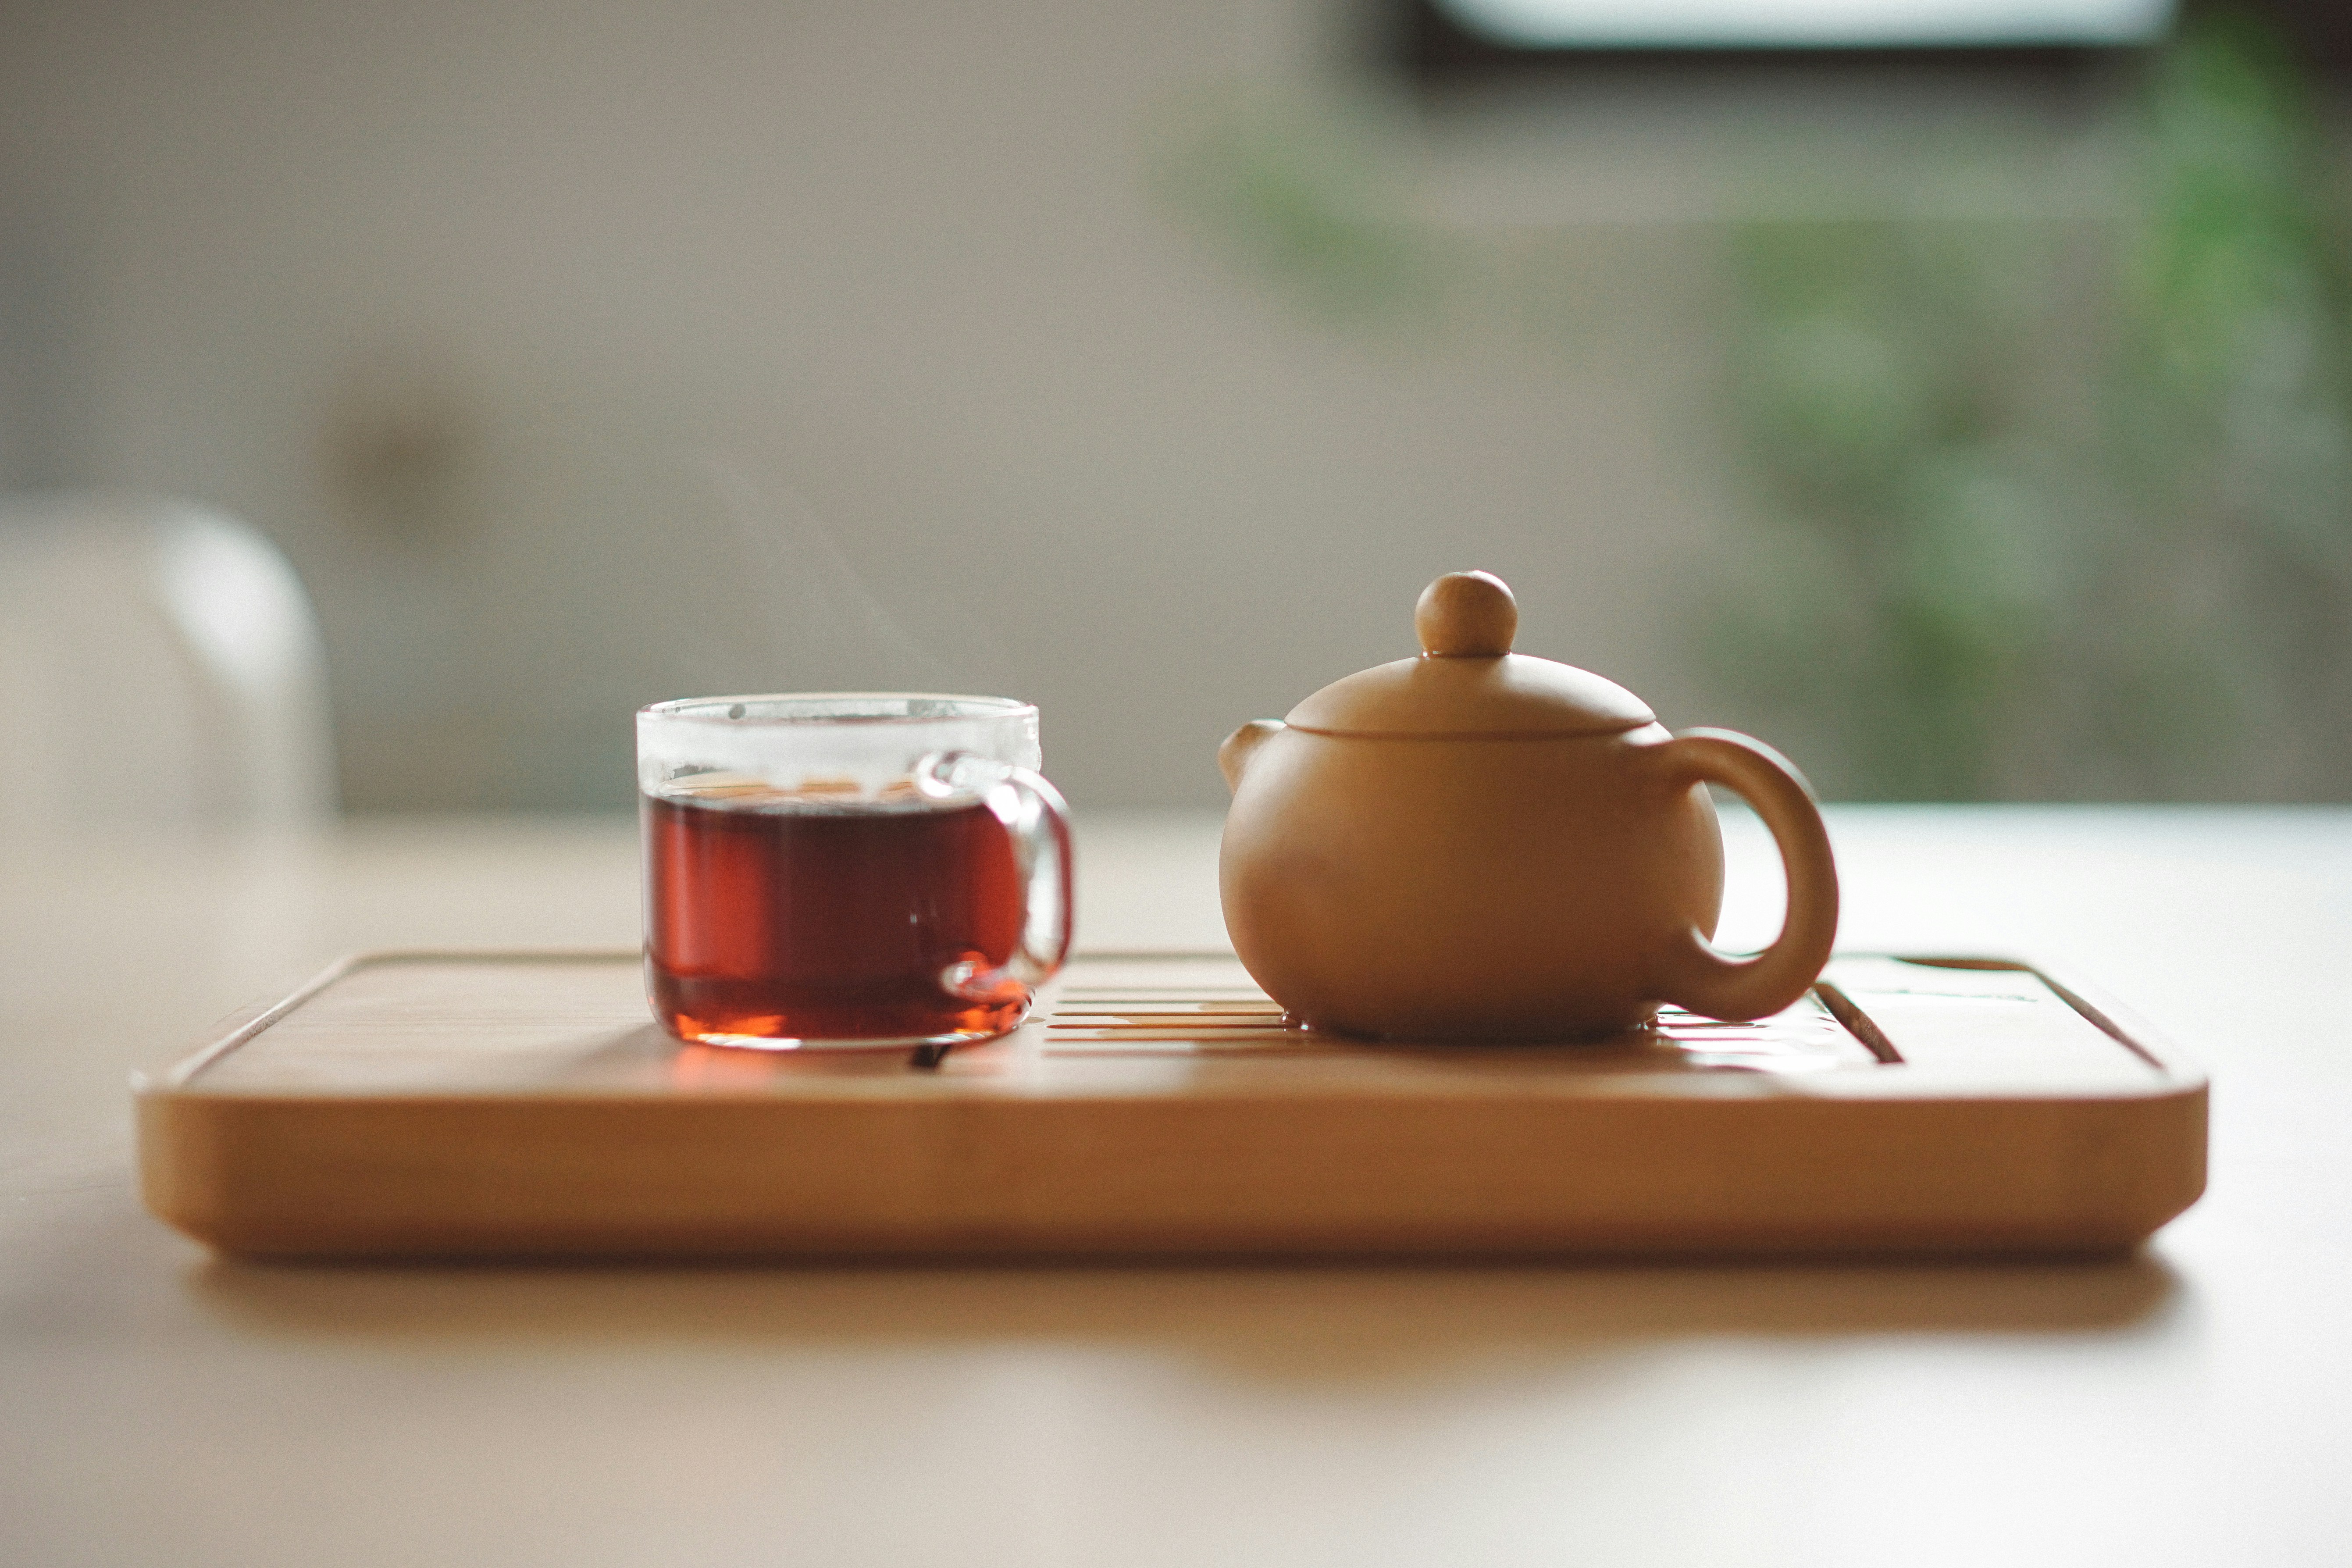 A tray with a tea pot and a tea cup | Source: Unsplash